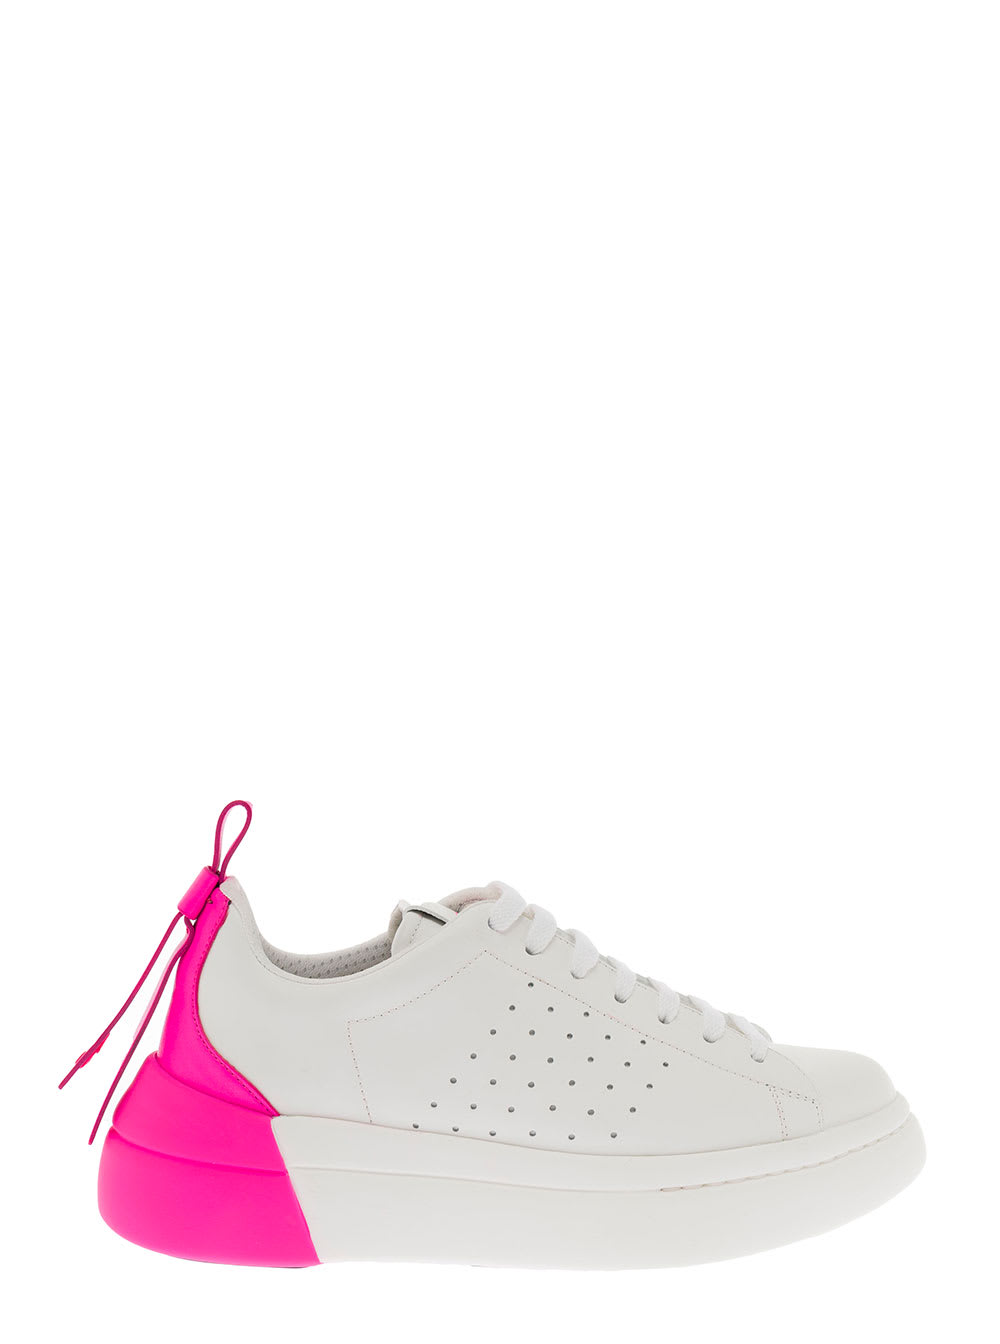 RED Valentino Red V Womans Bicolor White And Pink Leather Sneakers